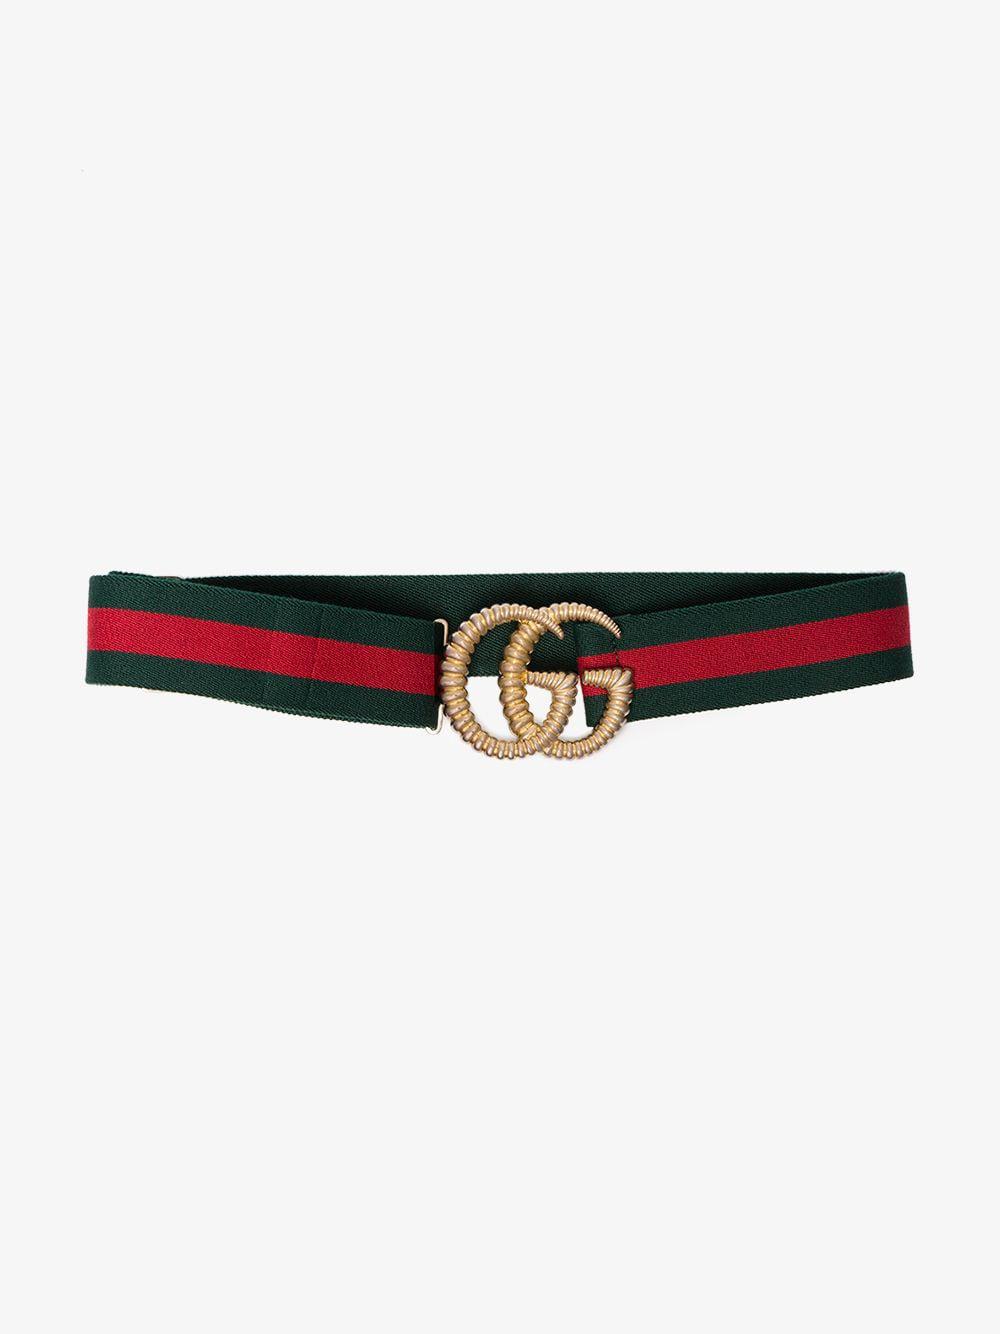 gucci belt green and red black buckle